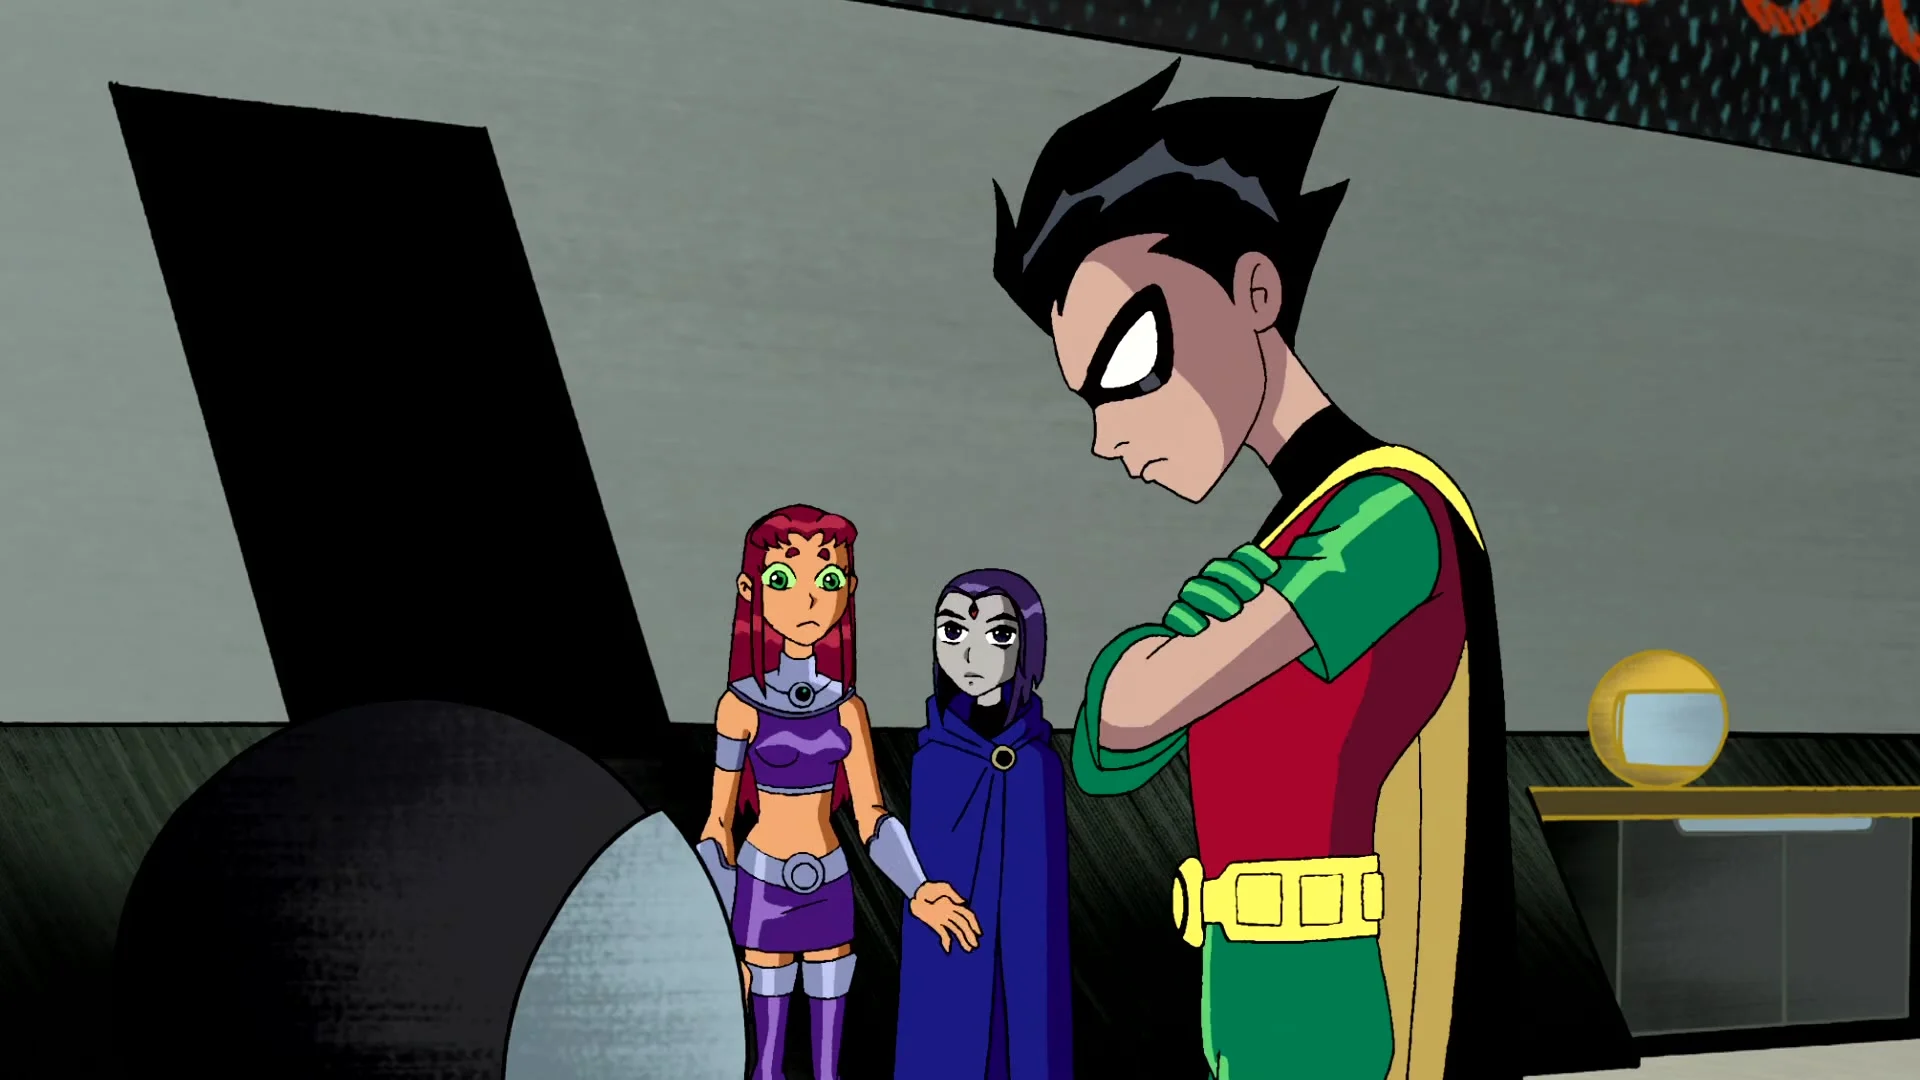 Teen Titans': The Complete Series Blu-Ray Review - Superhero Team Balances  Mature Storytelling With Endearing Fun